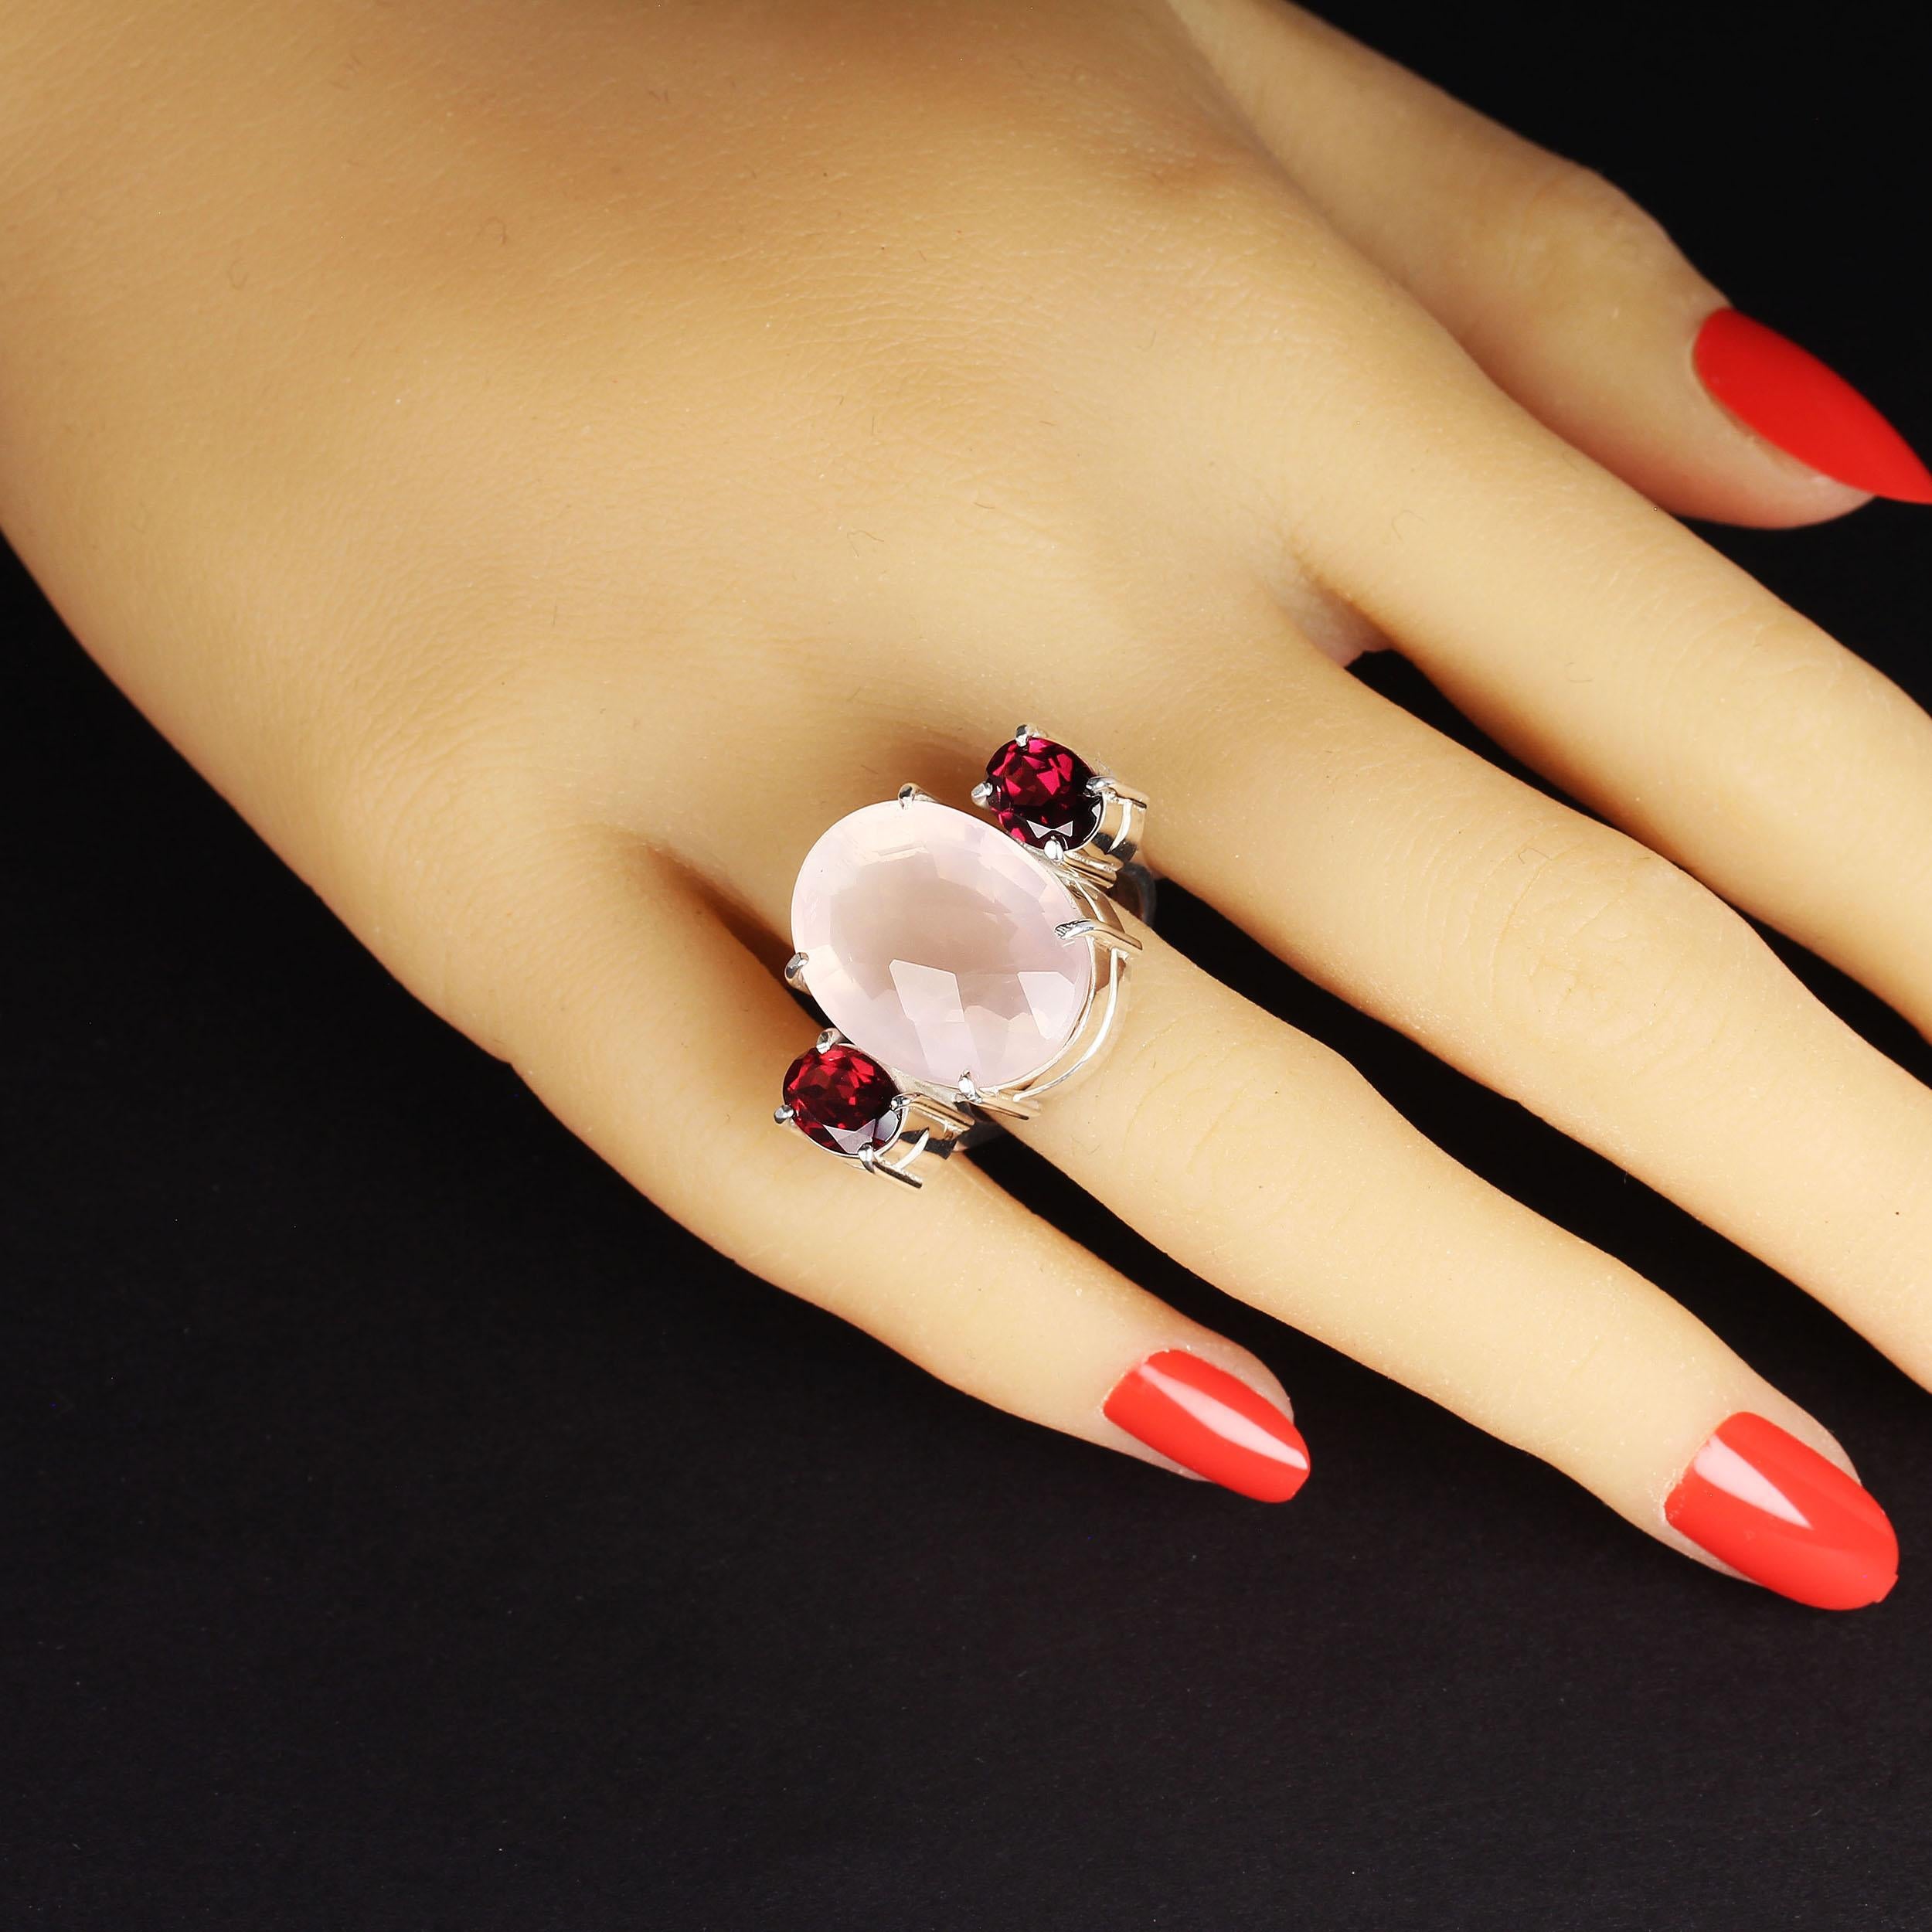 This exciting ring of Rose Quartz and Garnet is just what you want for Valentine's Day and on through the year.  The generous 20.2 carat translucent oval rose quartz features a checkerboard table. The two sparkling oval garnets which accent the rose